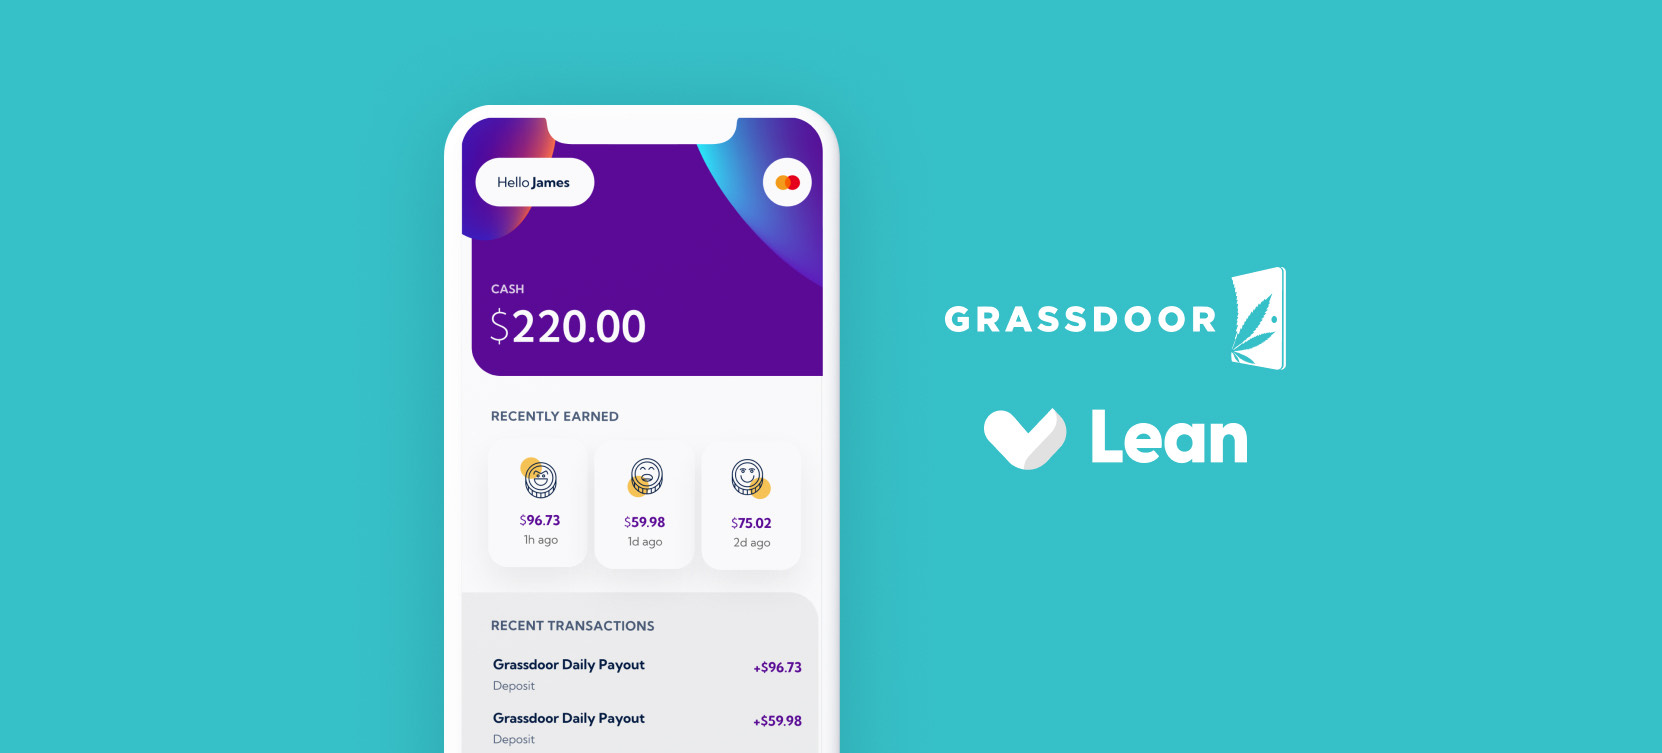 Lean Now Offering Instant Pay to Grassdoor Drivers